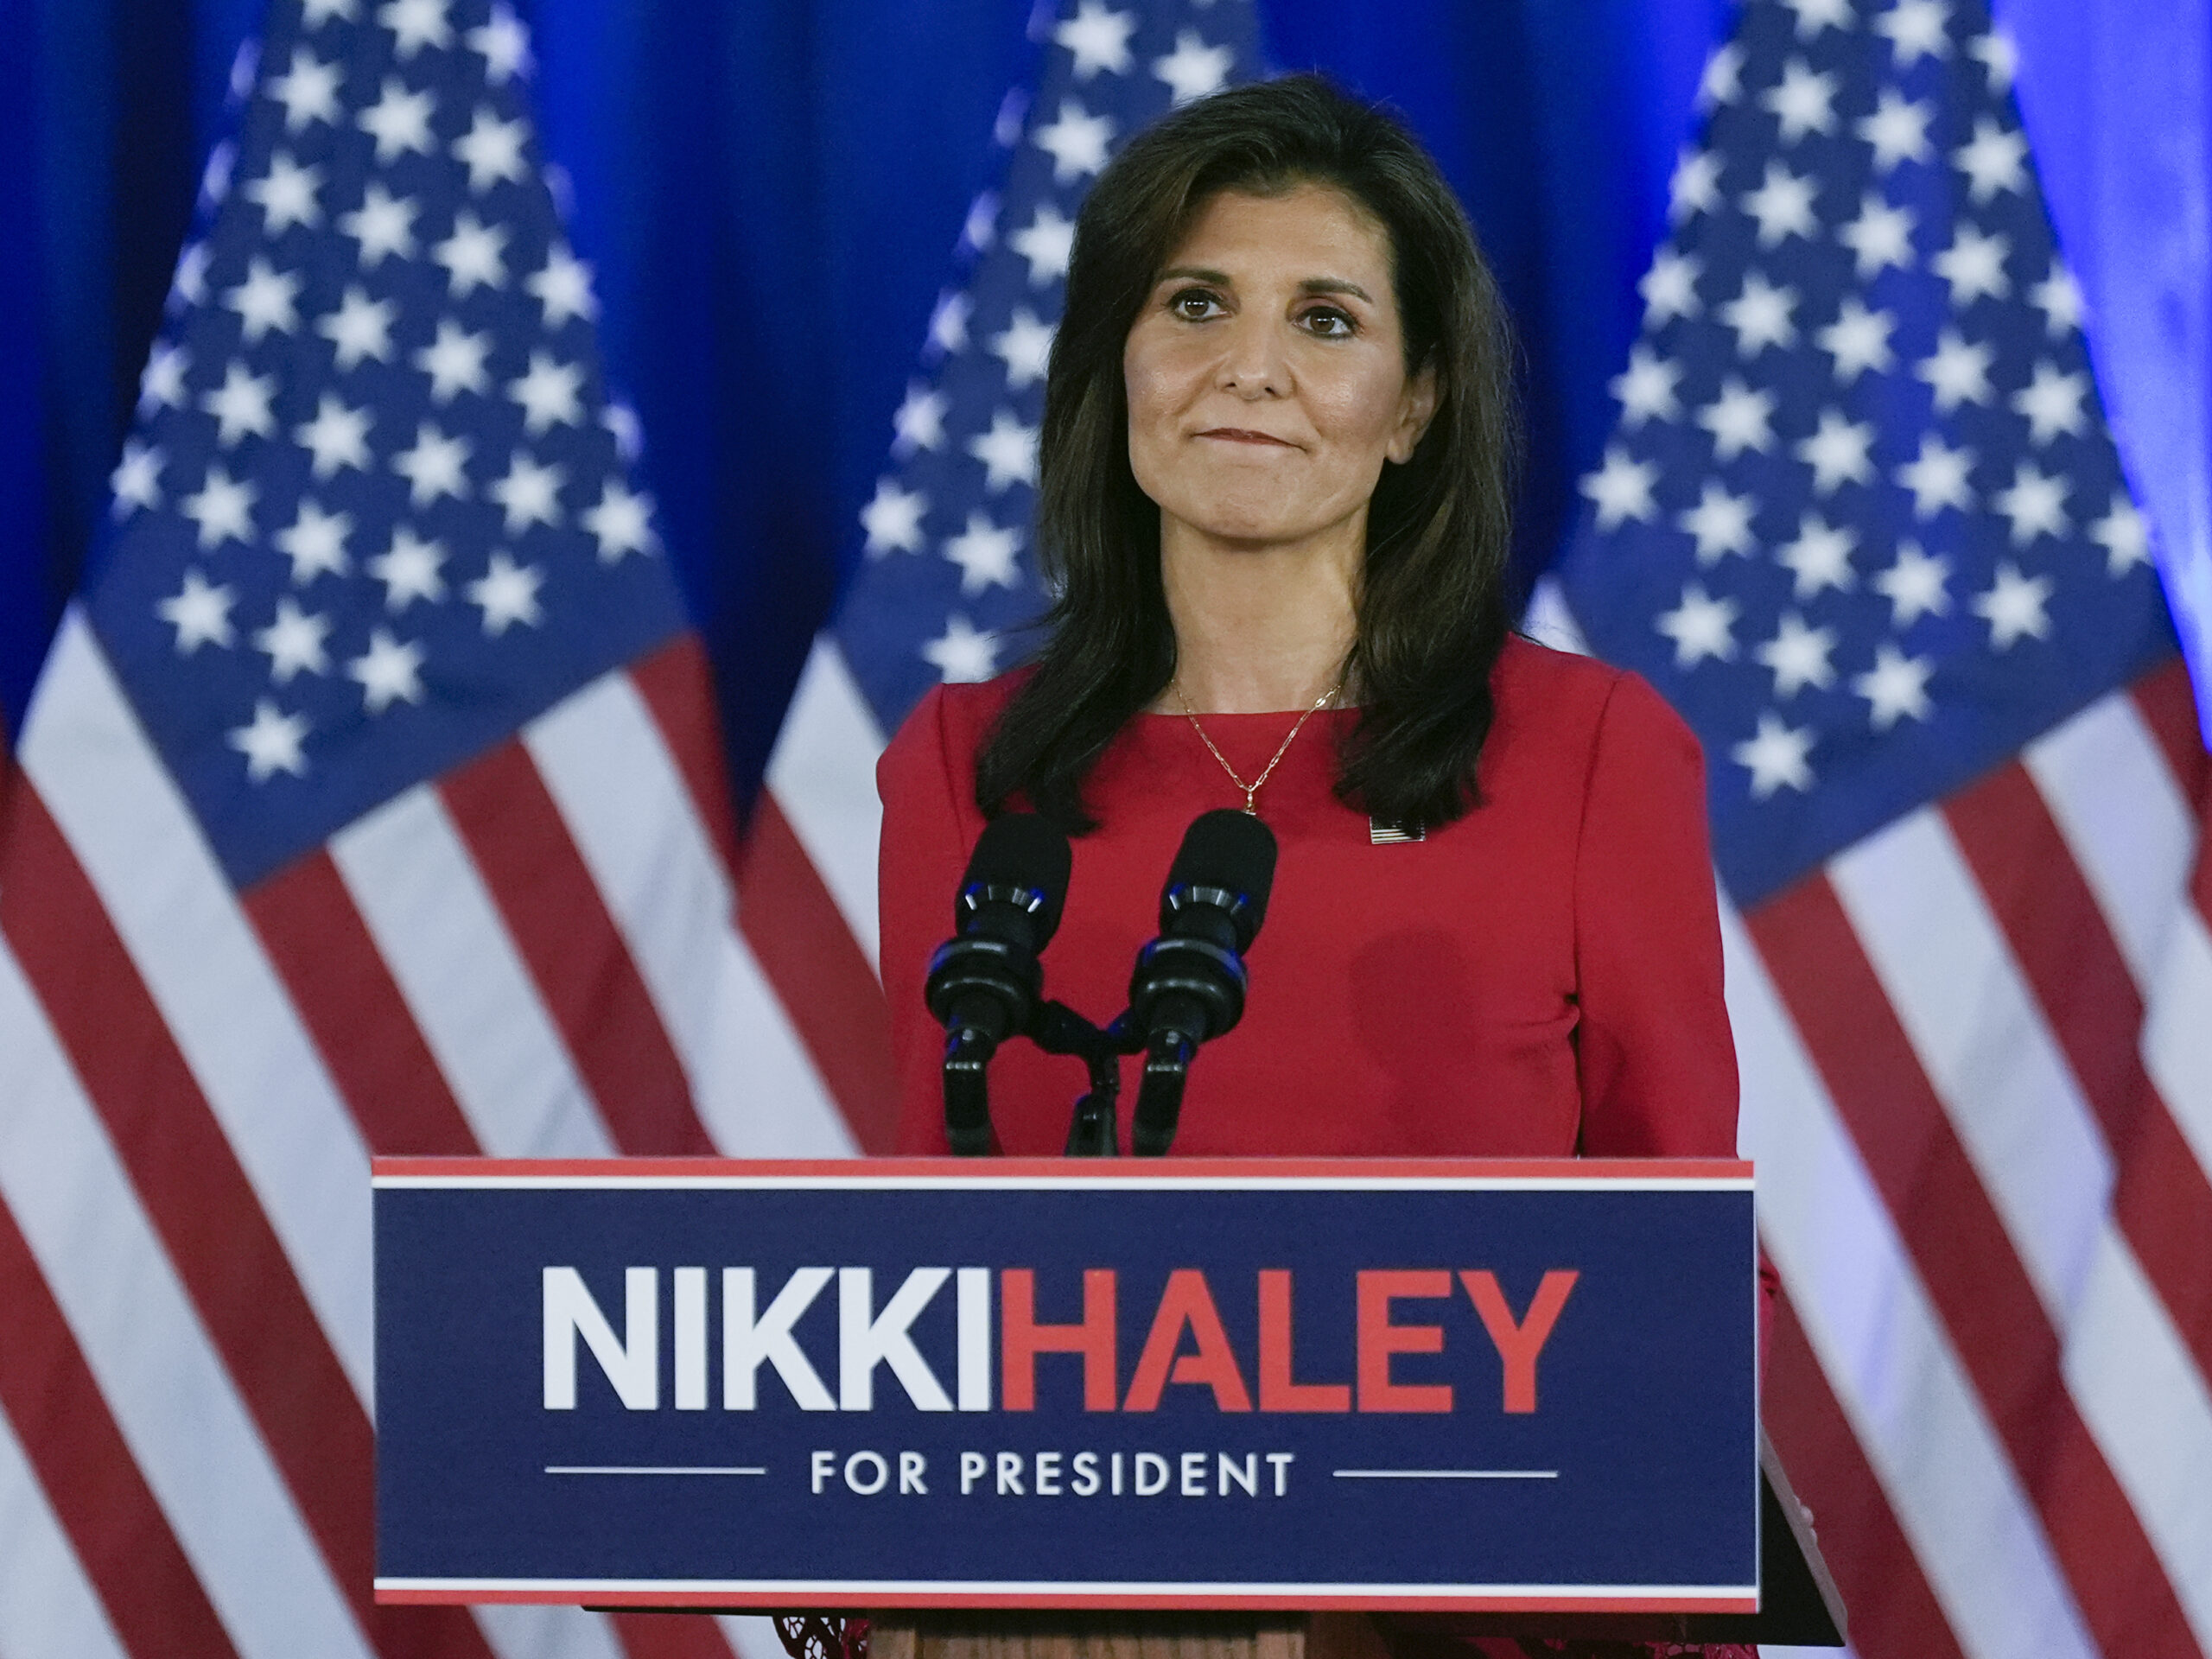 Nikki Haley suspends her presidential campaign, but doesn’t endorse Trump